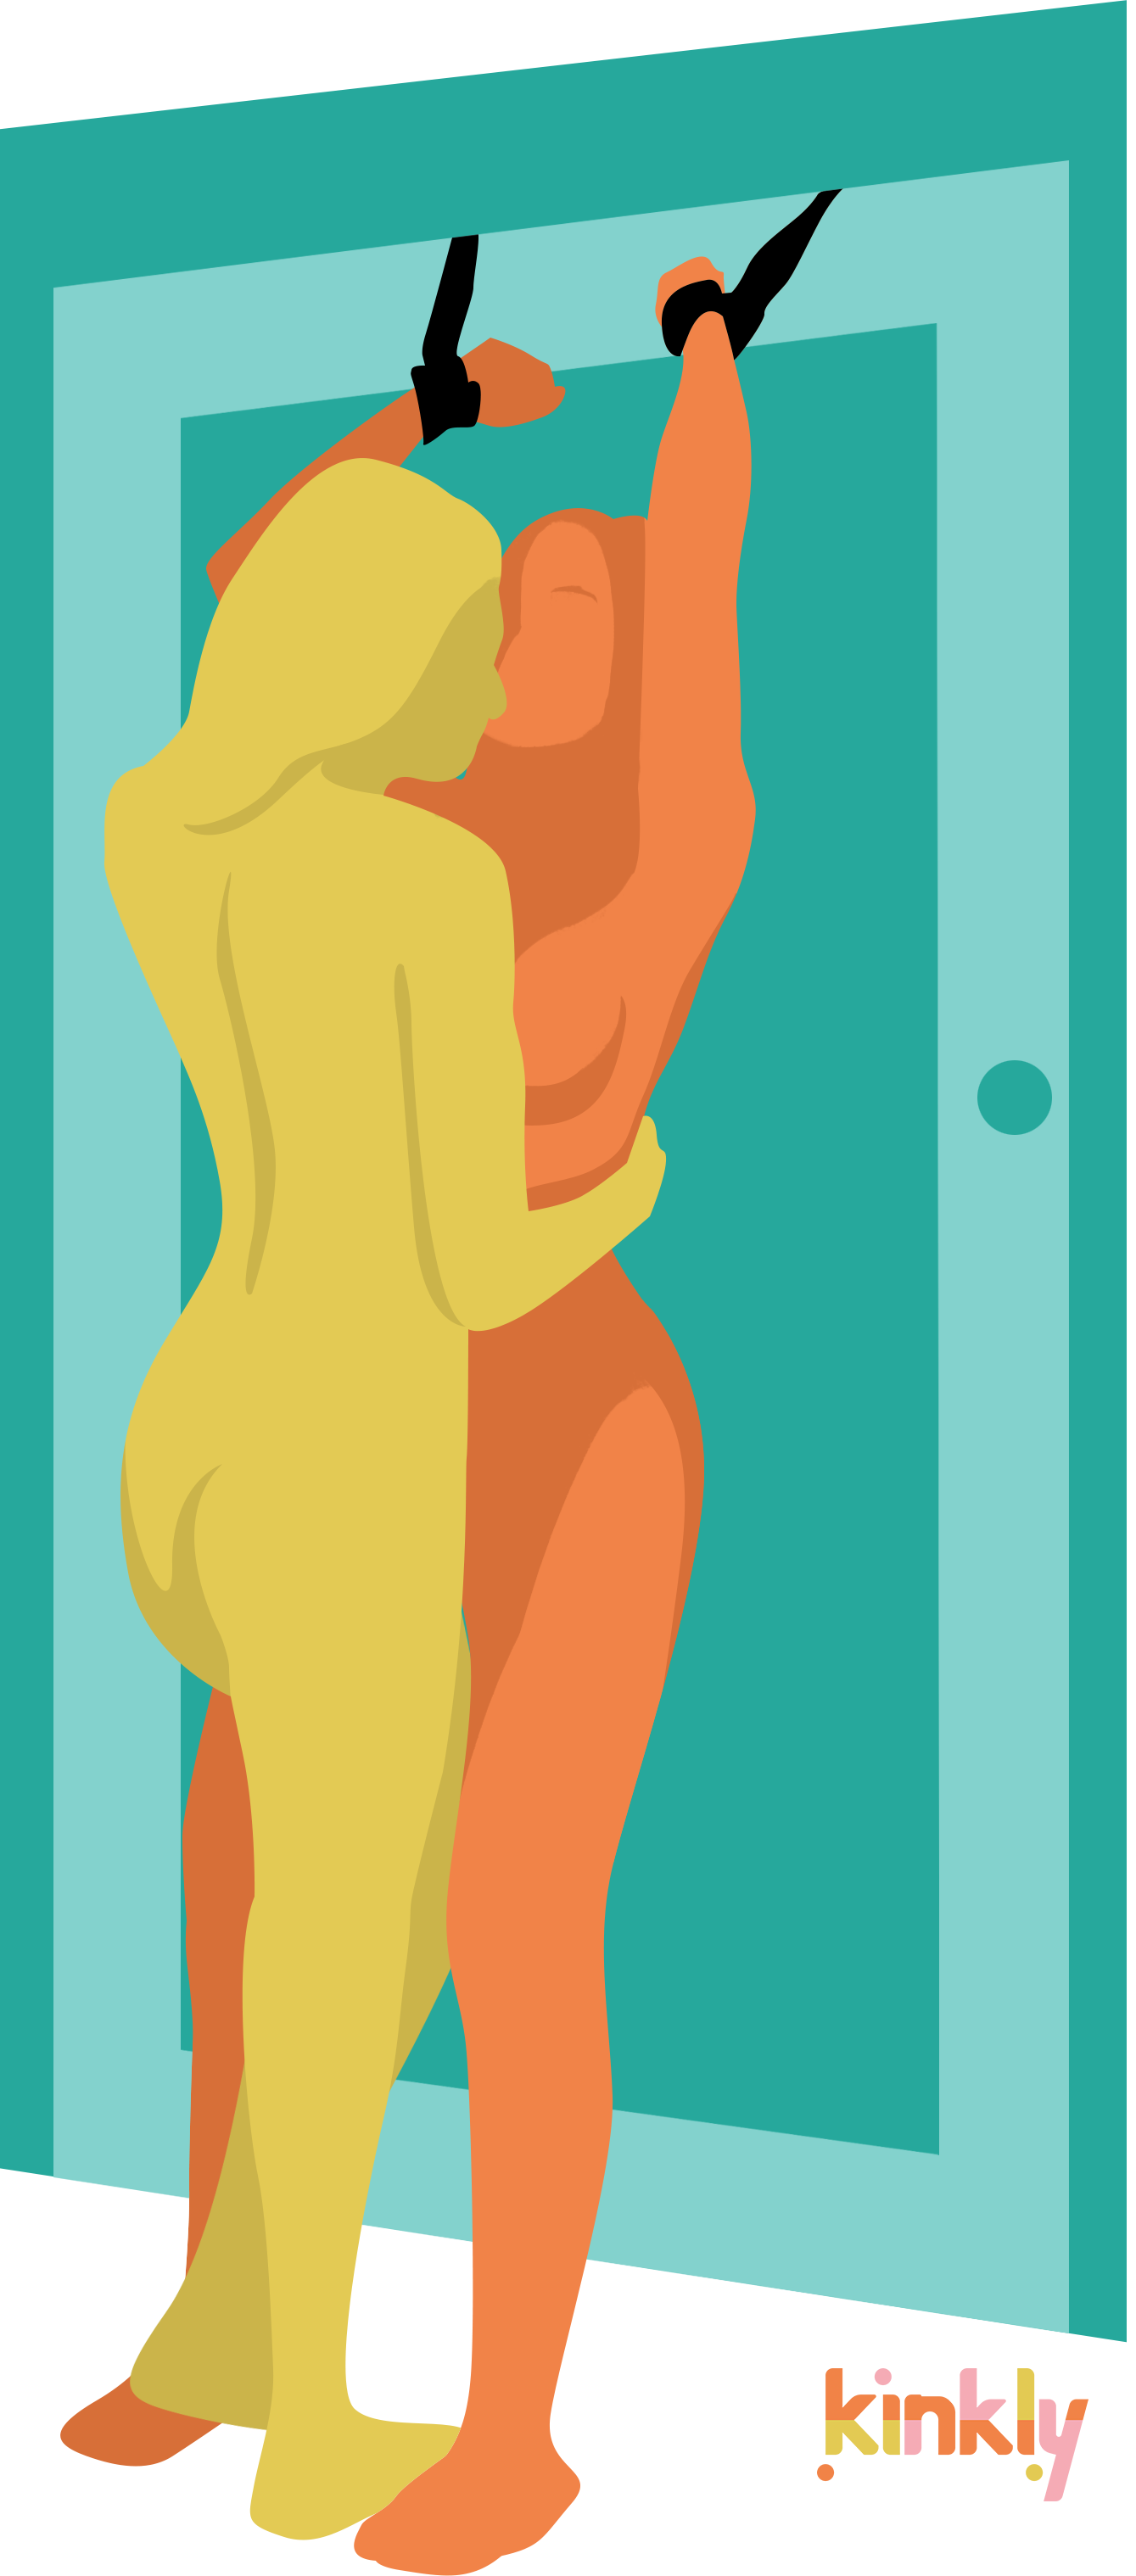 Illustration shows two people using the Sportsheets Door Jam Cuffs. The Door Jam cuffs are secured above the closed door, and one person has their hands held above their head by the cuffs. Their partner is standing close to them, making out with them as the bound person is secured by the cuffs. | Kinkly Shop